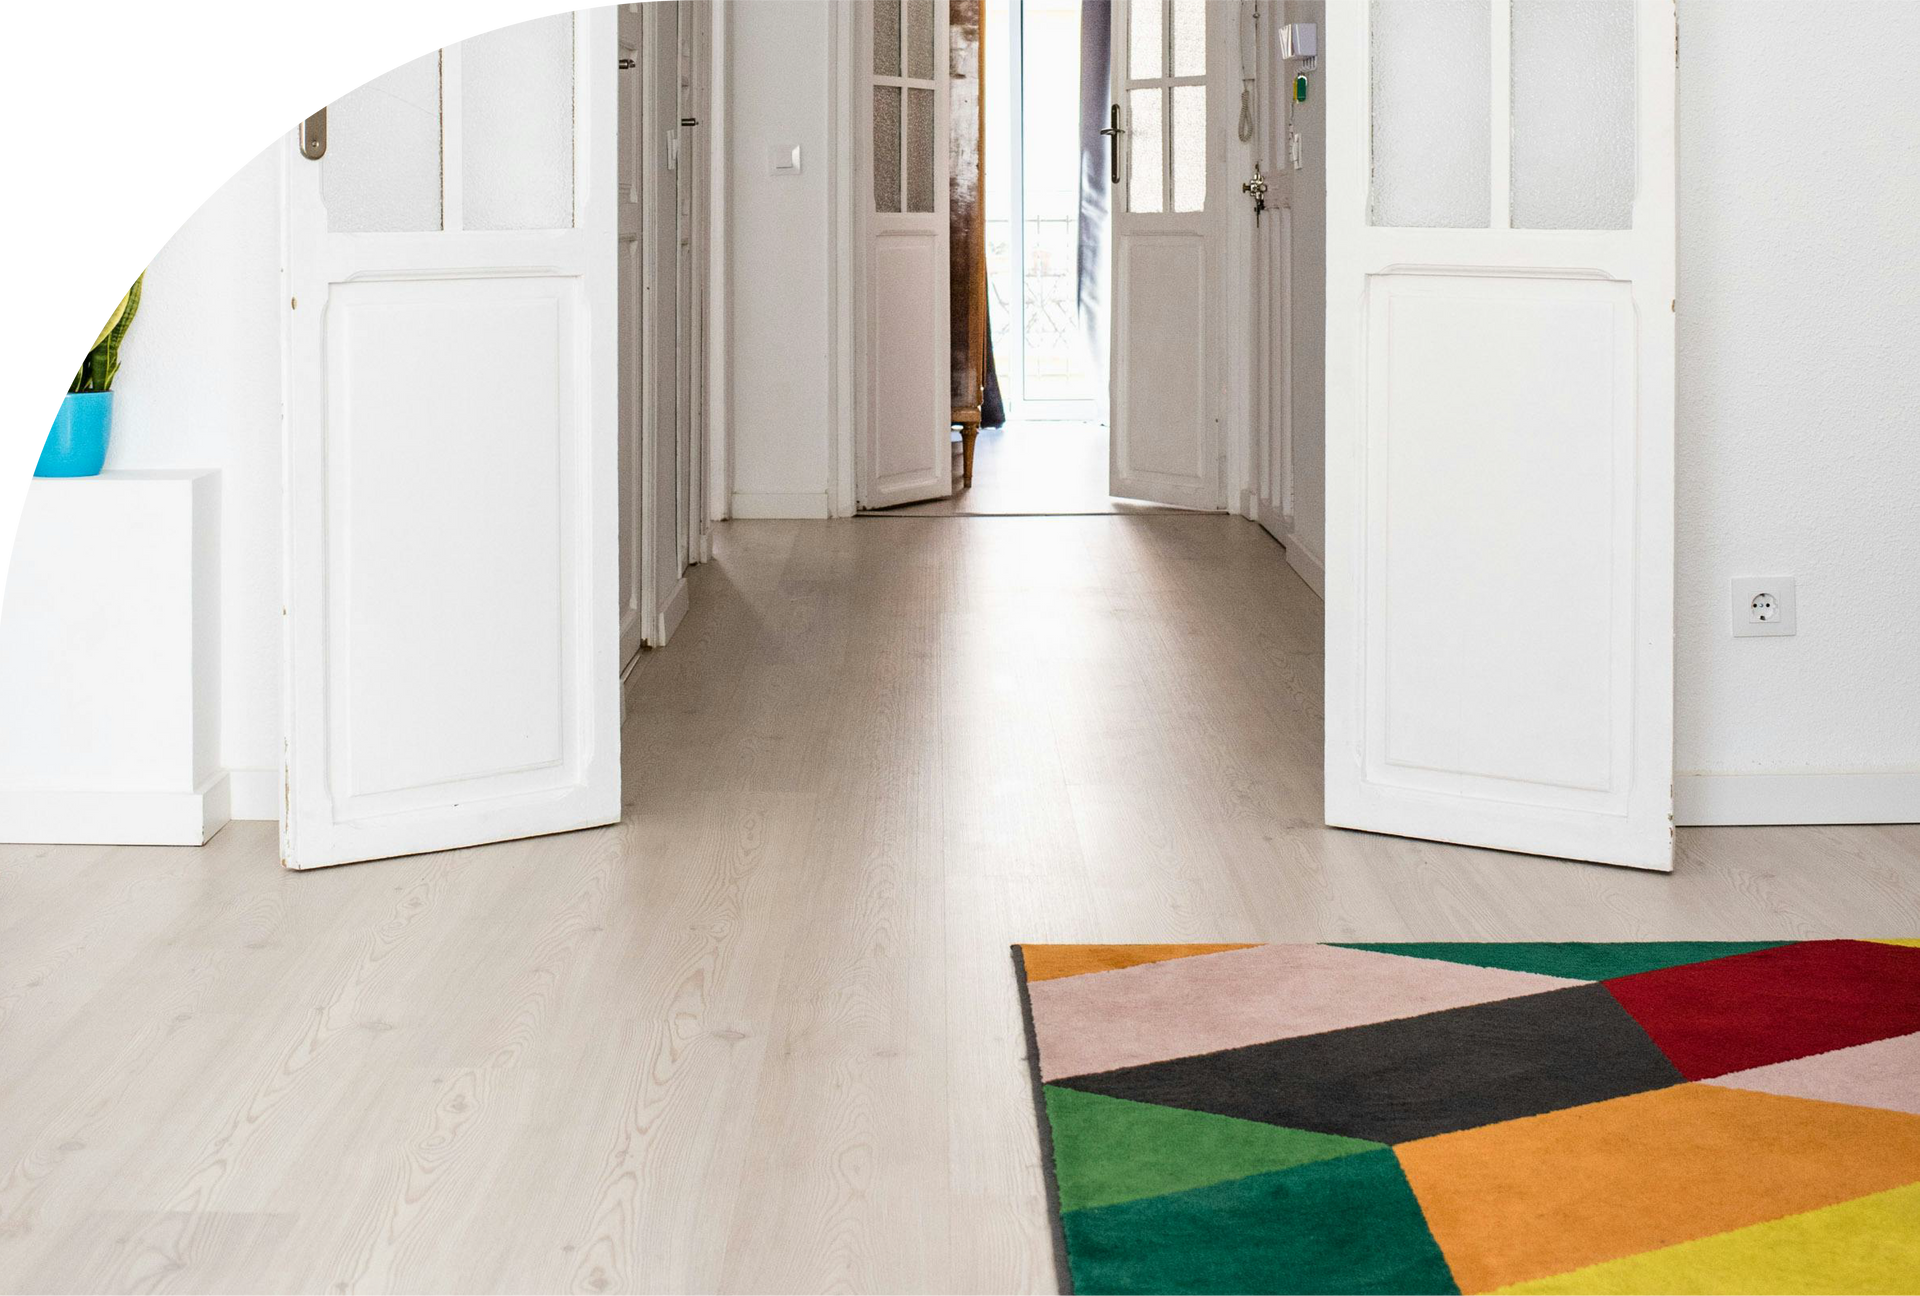 A hallway with white doors and a colorful rug on the floor.